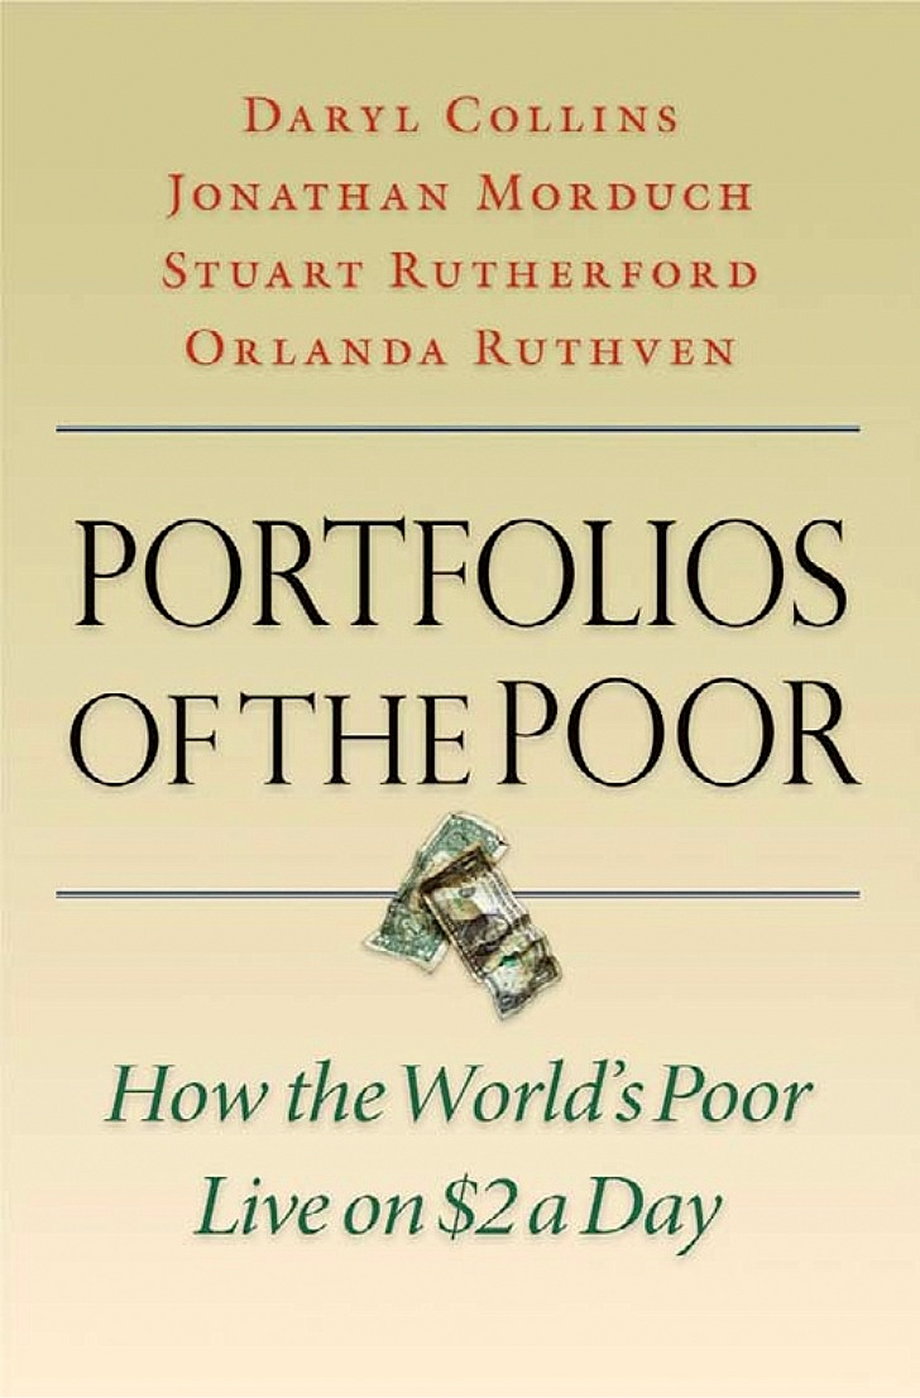 'Portfolios of the Poor' by Daryl Collins, Jonathan Morduch, Stuart Rutherford, and Orlanda Ruthven